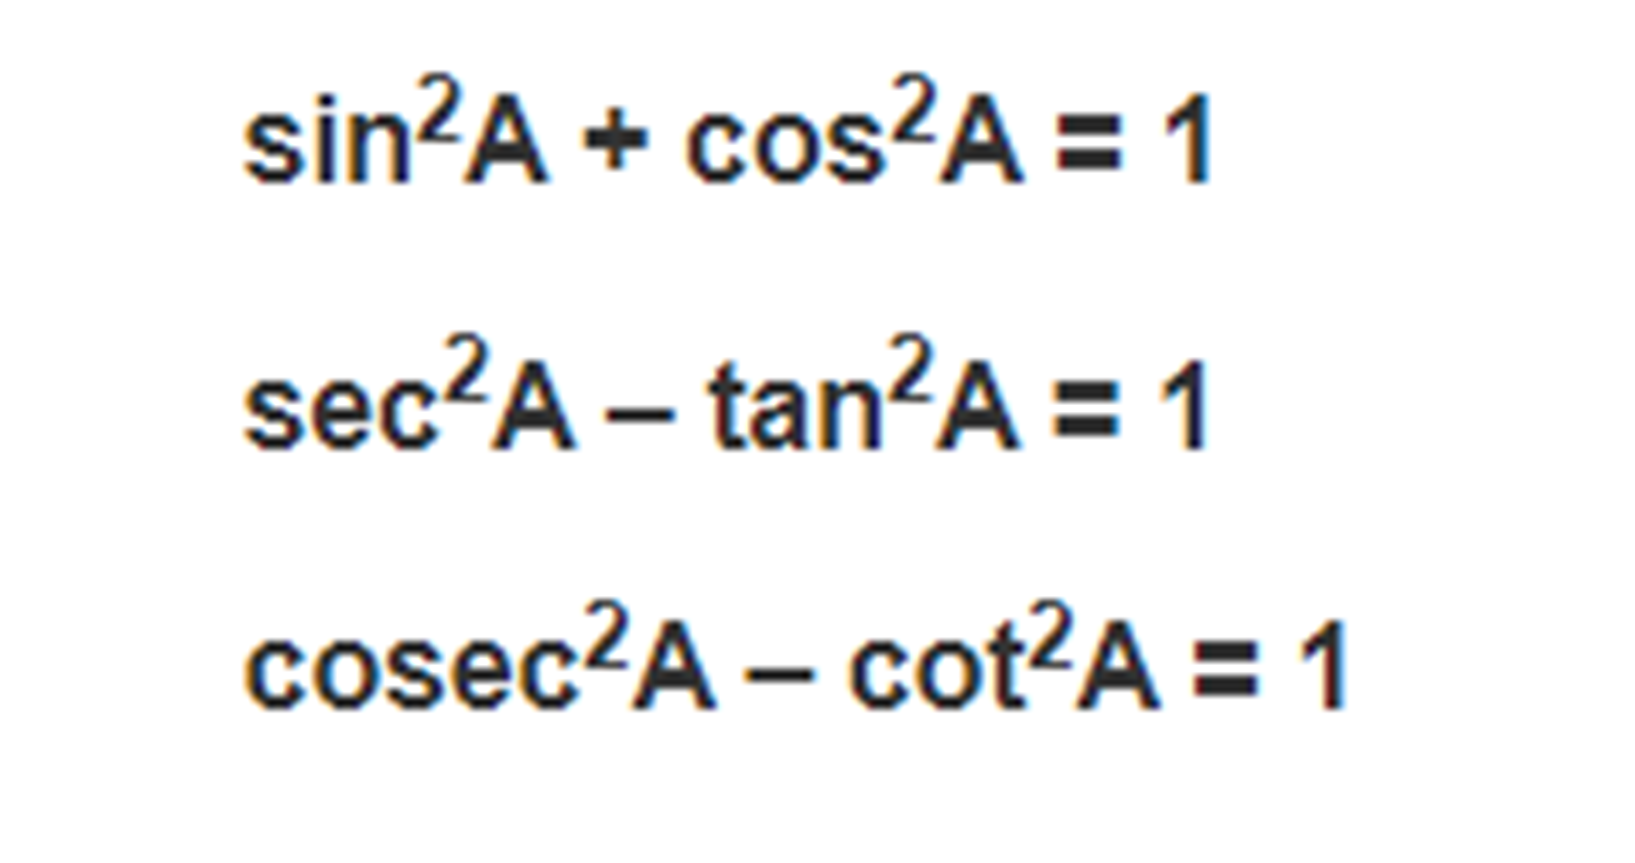 This is a very fundamental identity in trigonometry. Similarly, we can deduce other identities. They are listed here.
